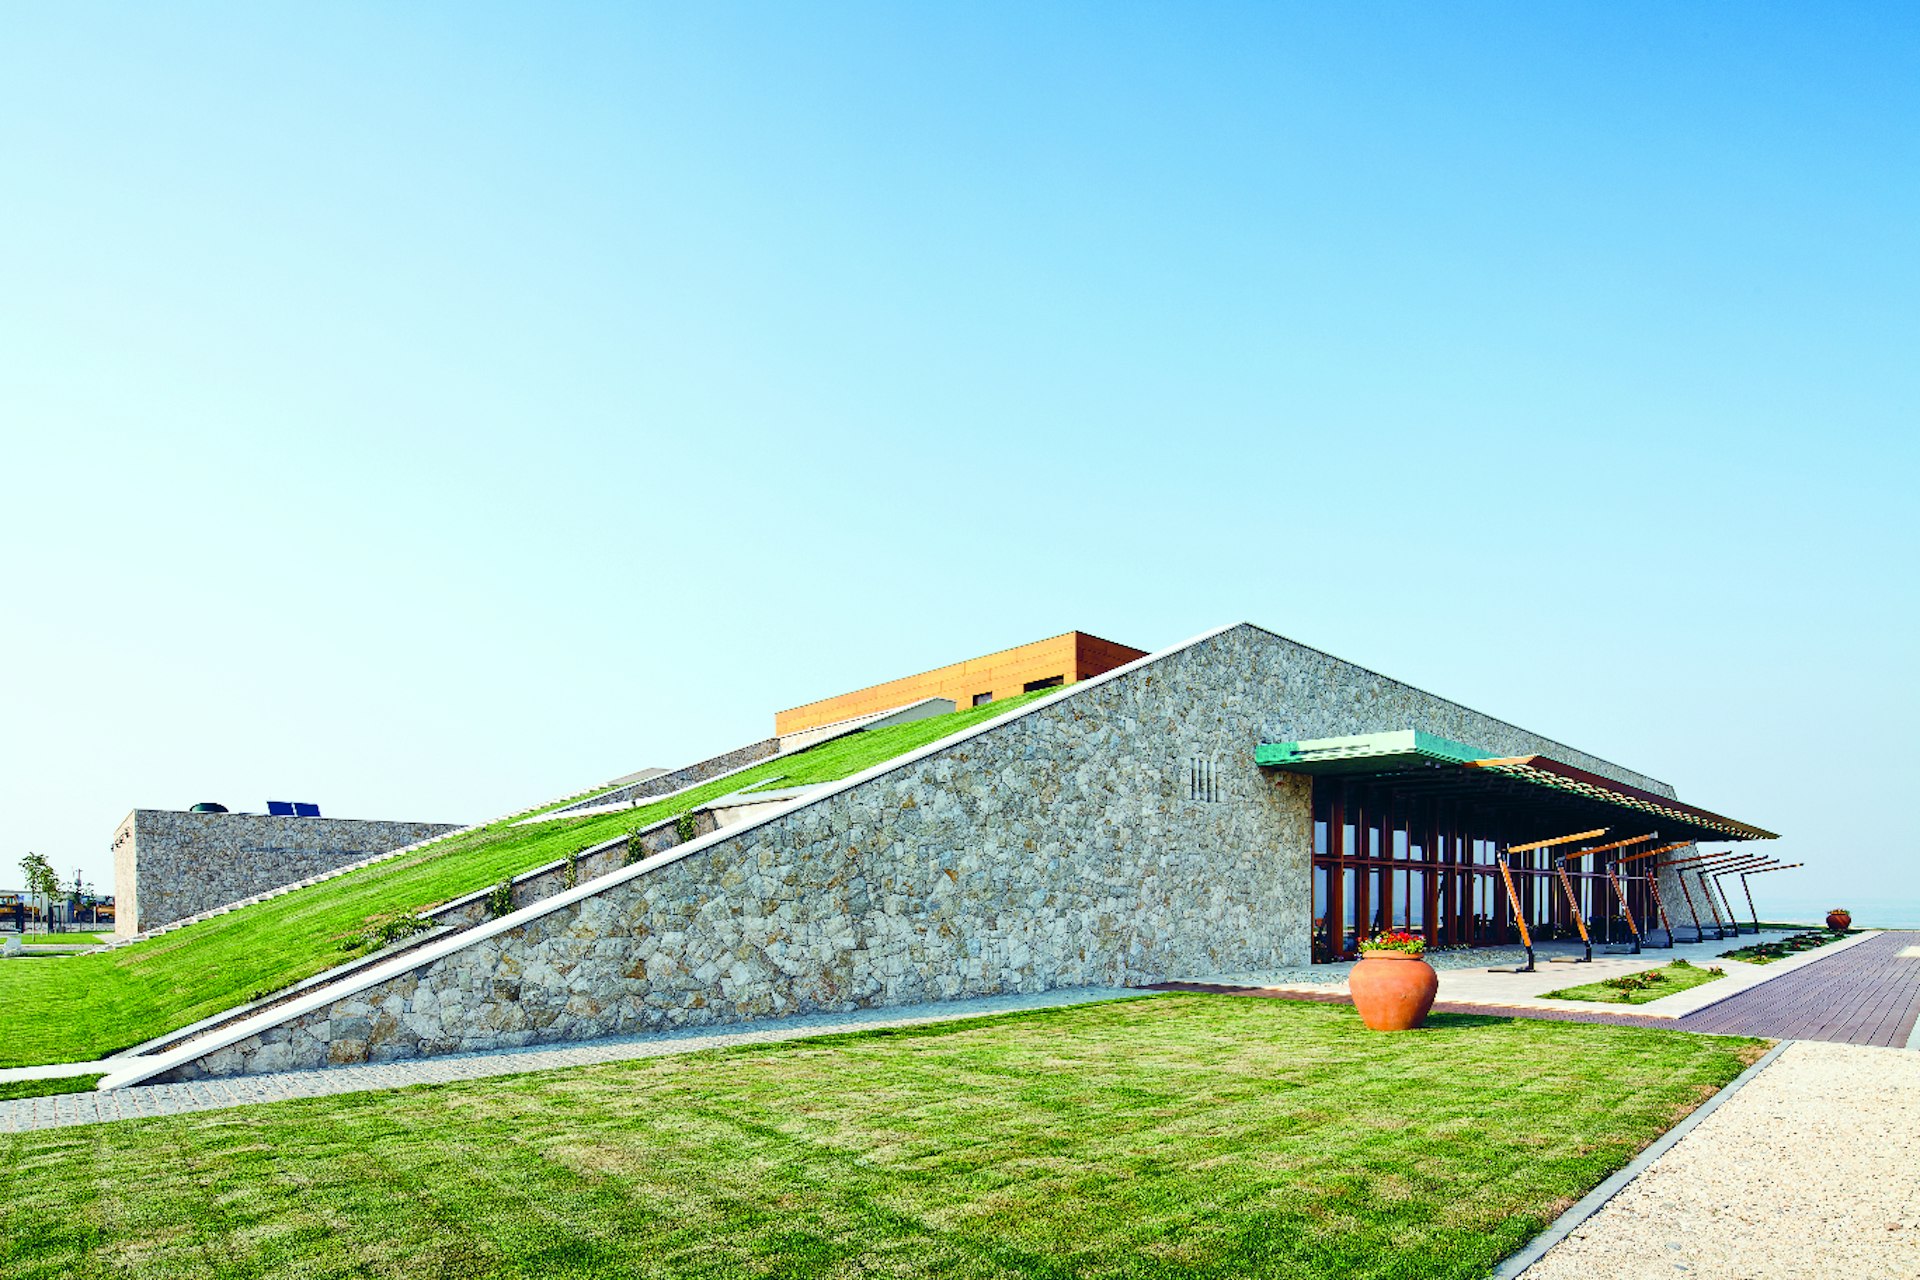 The exterior of a wine-tasting room, with a sloped roof covered in grass